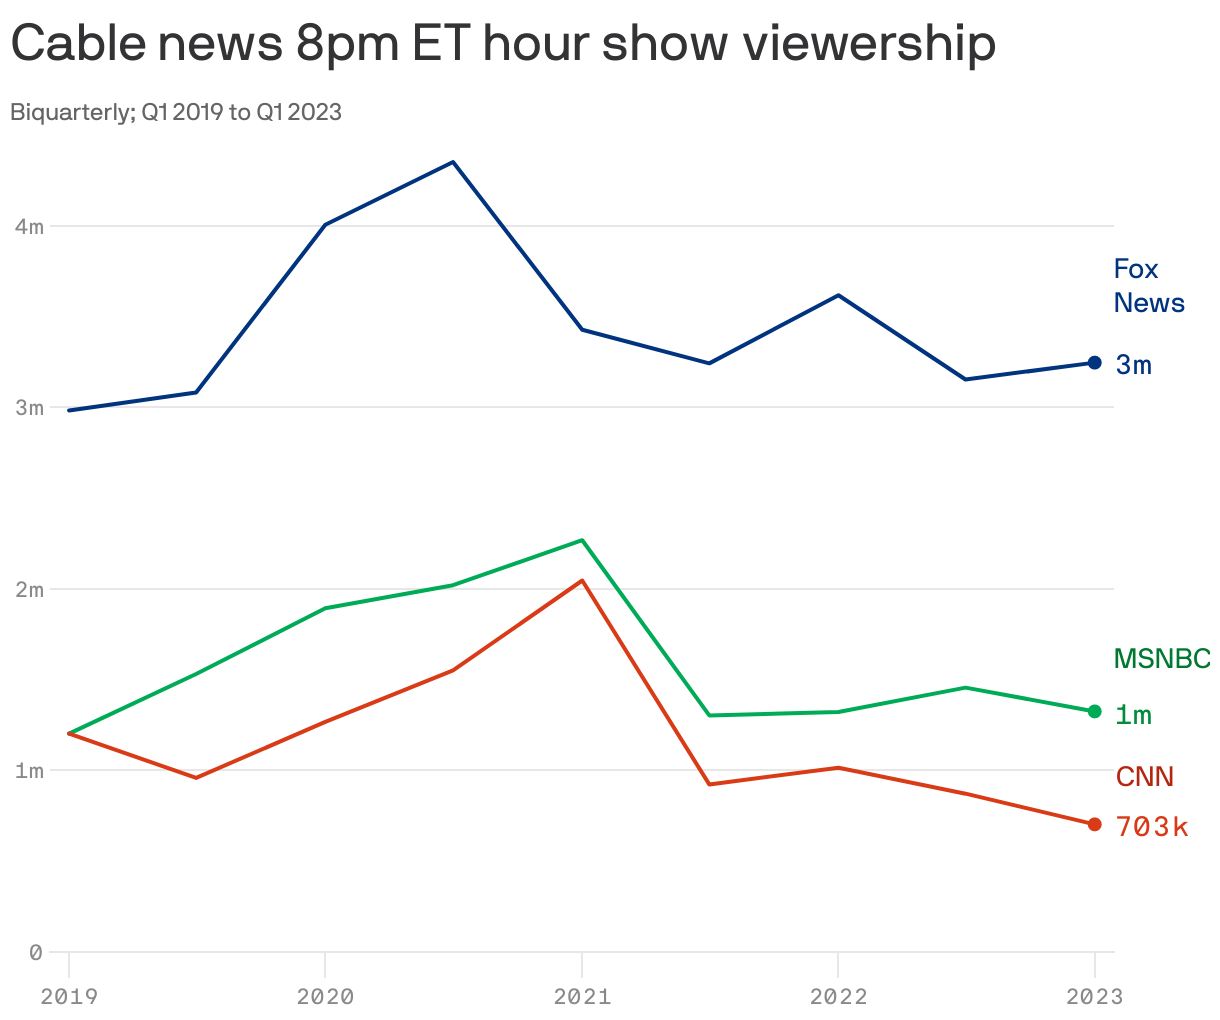 Cable news 8pm ET hour show viewership